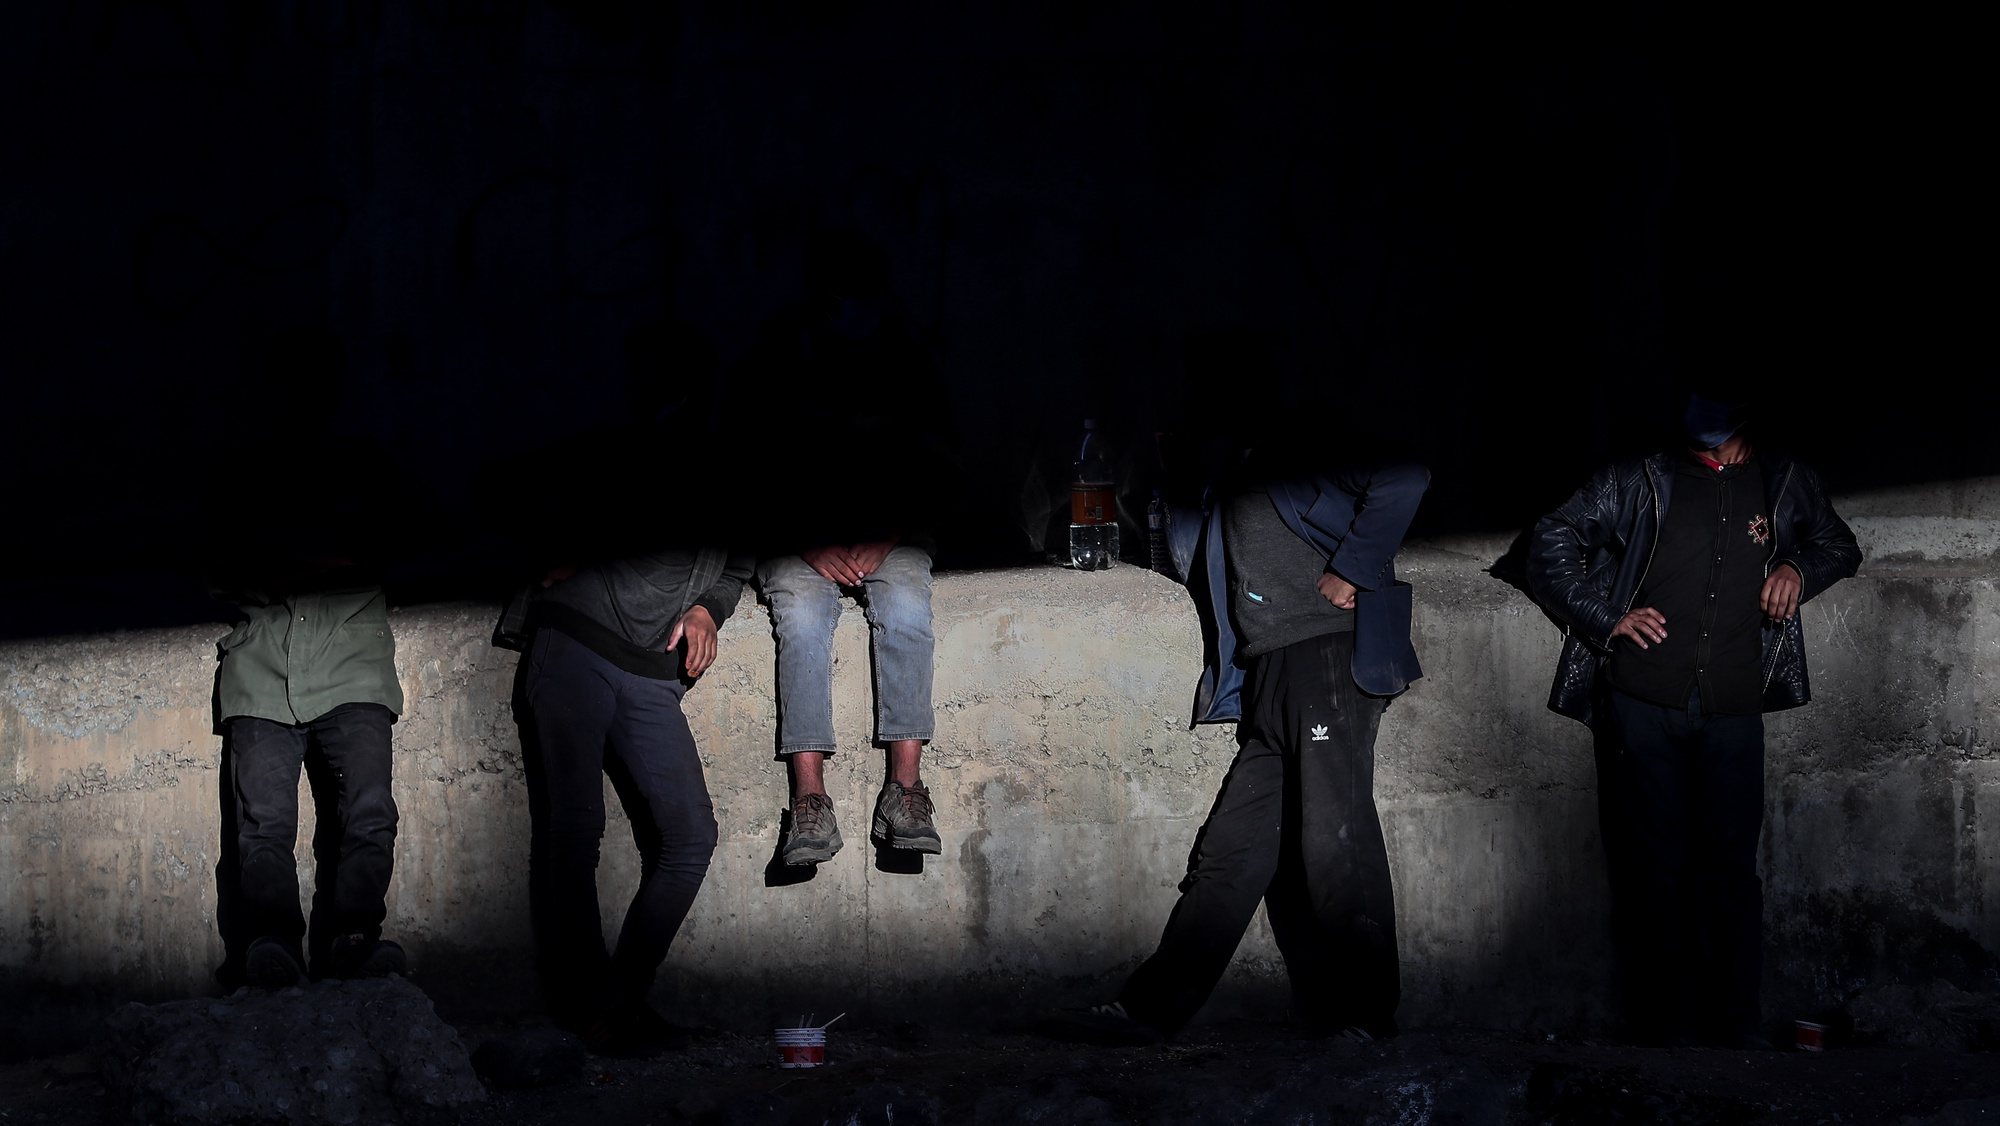 epa09623482 A group of people rest under a bridge near a railway in the Turkish city of Van after crossing the Iran-Turkey border, 02 June 2021. People smuggled into the country wait for days to be transferred by smugglers to Diyarbakir city to reach west Turkey. The city of Van, on the Turkish-Iranian border, is one of the points at which human smuggling can be easily spotted. Smugglers charge between 600 or 1,000 US dollars per person, depending on the security situation at the border.  EPA/SEDAT SUNA